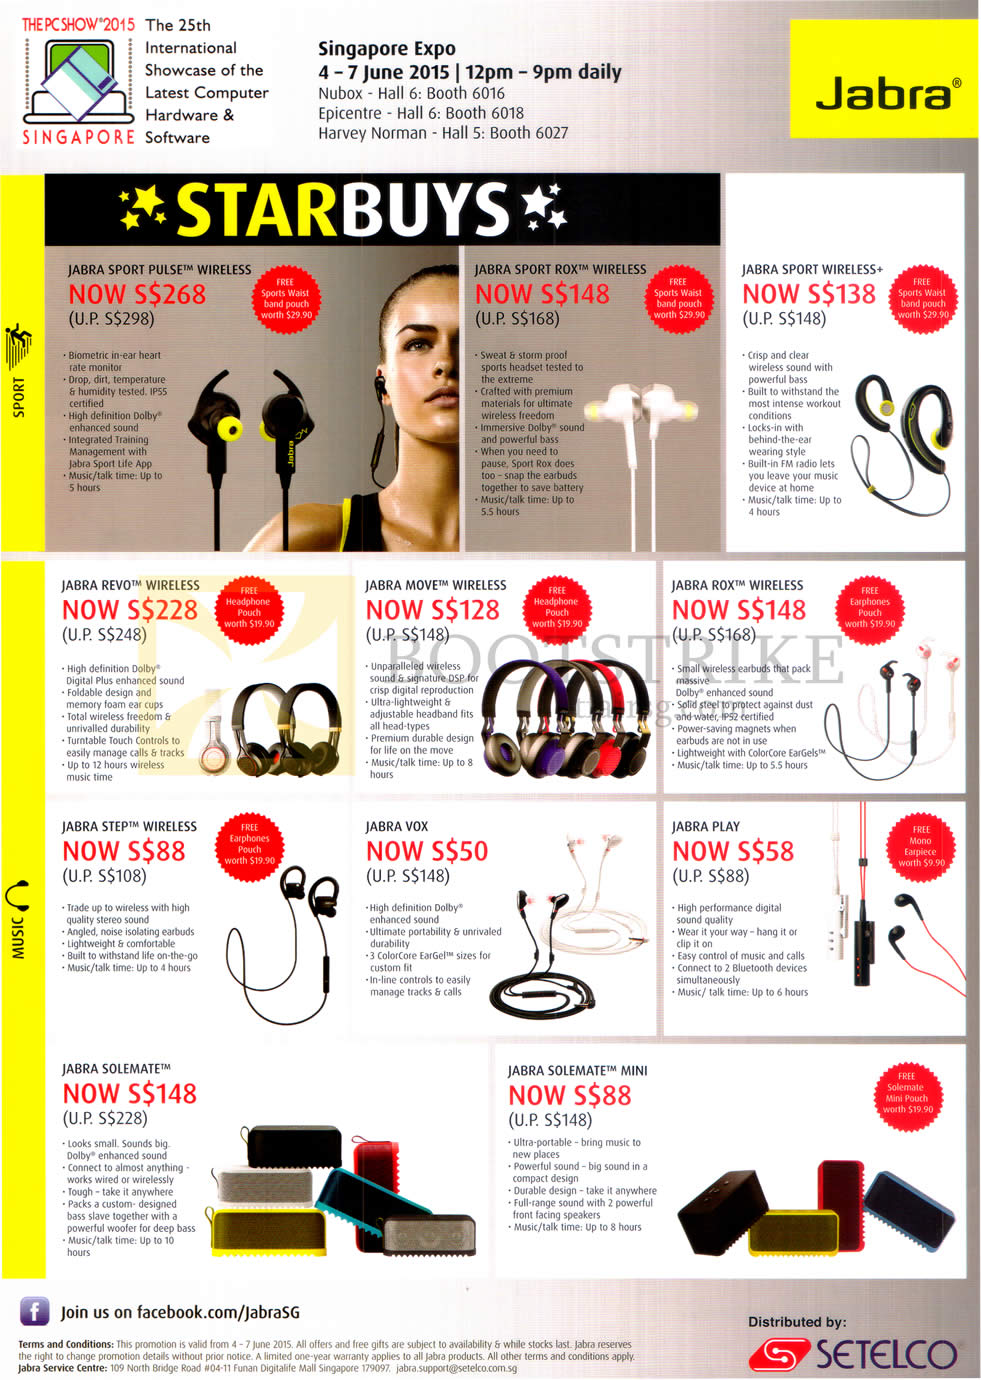 PC SHOW 2015 price list image brochure of Jabra Bluetooth Headsets, Pulse, Move, Step, Solemate, Play, Solemate Mini, Sport Pulse Wireless, Rox